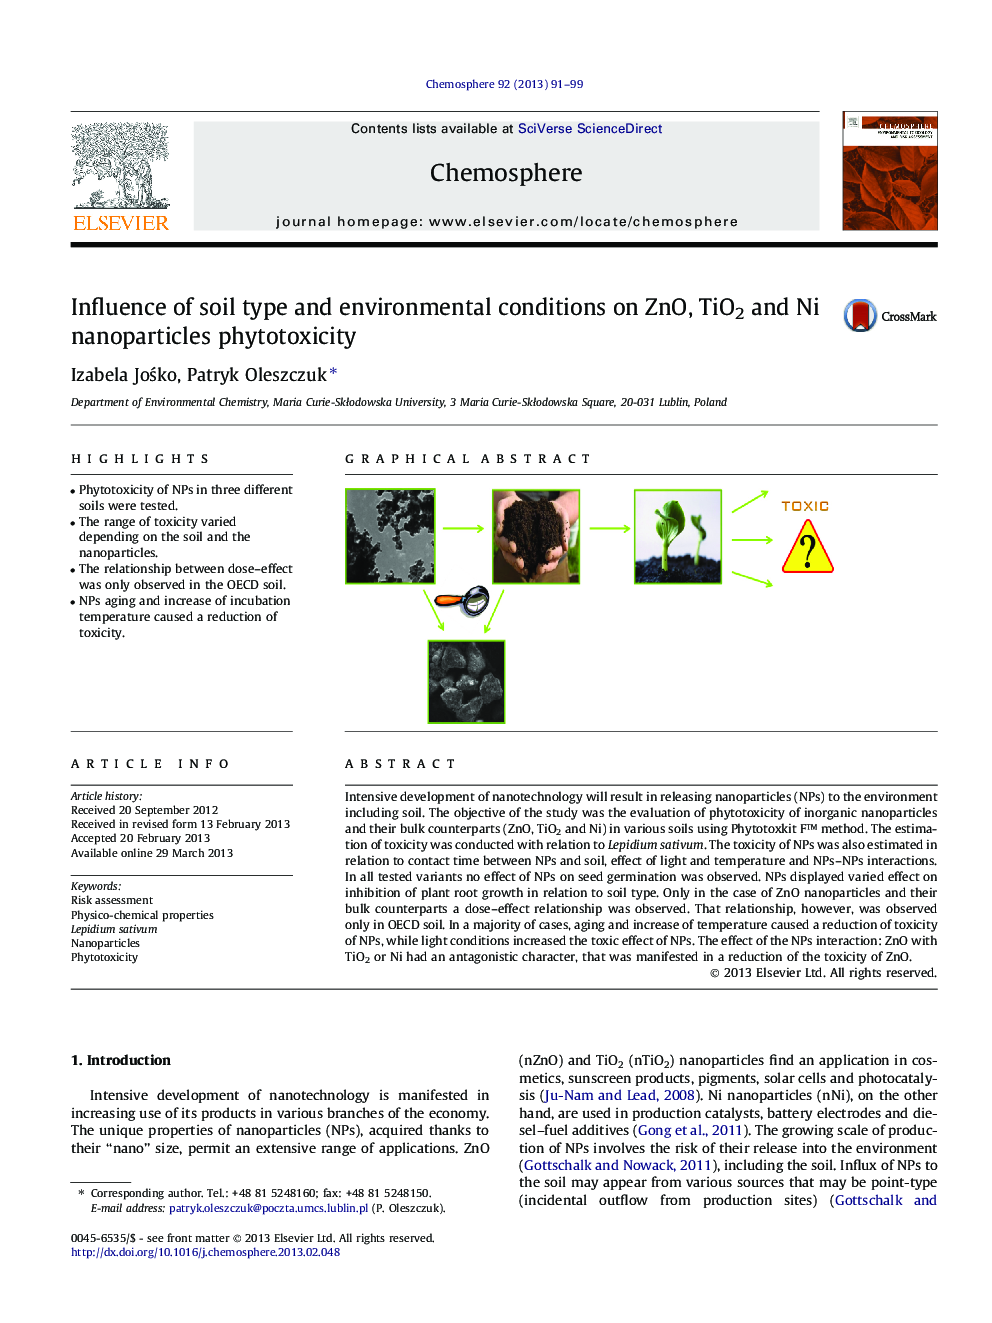 Influence of soil type and environmental conditions on ZnO, TiO2 and Ni nanoparticles phytotoxicity